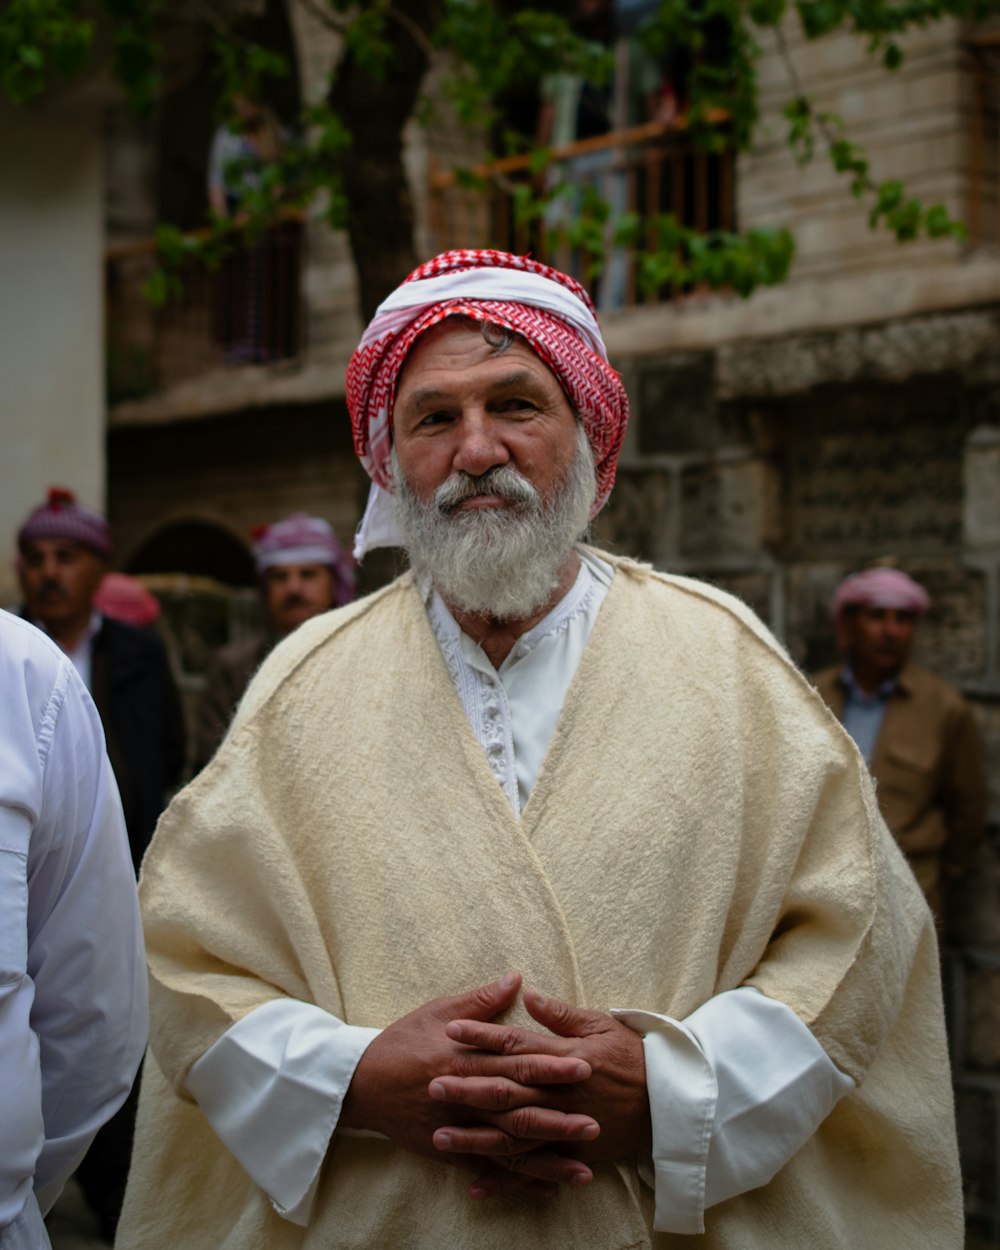 a man with a white beard wearing a red and white turban